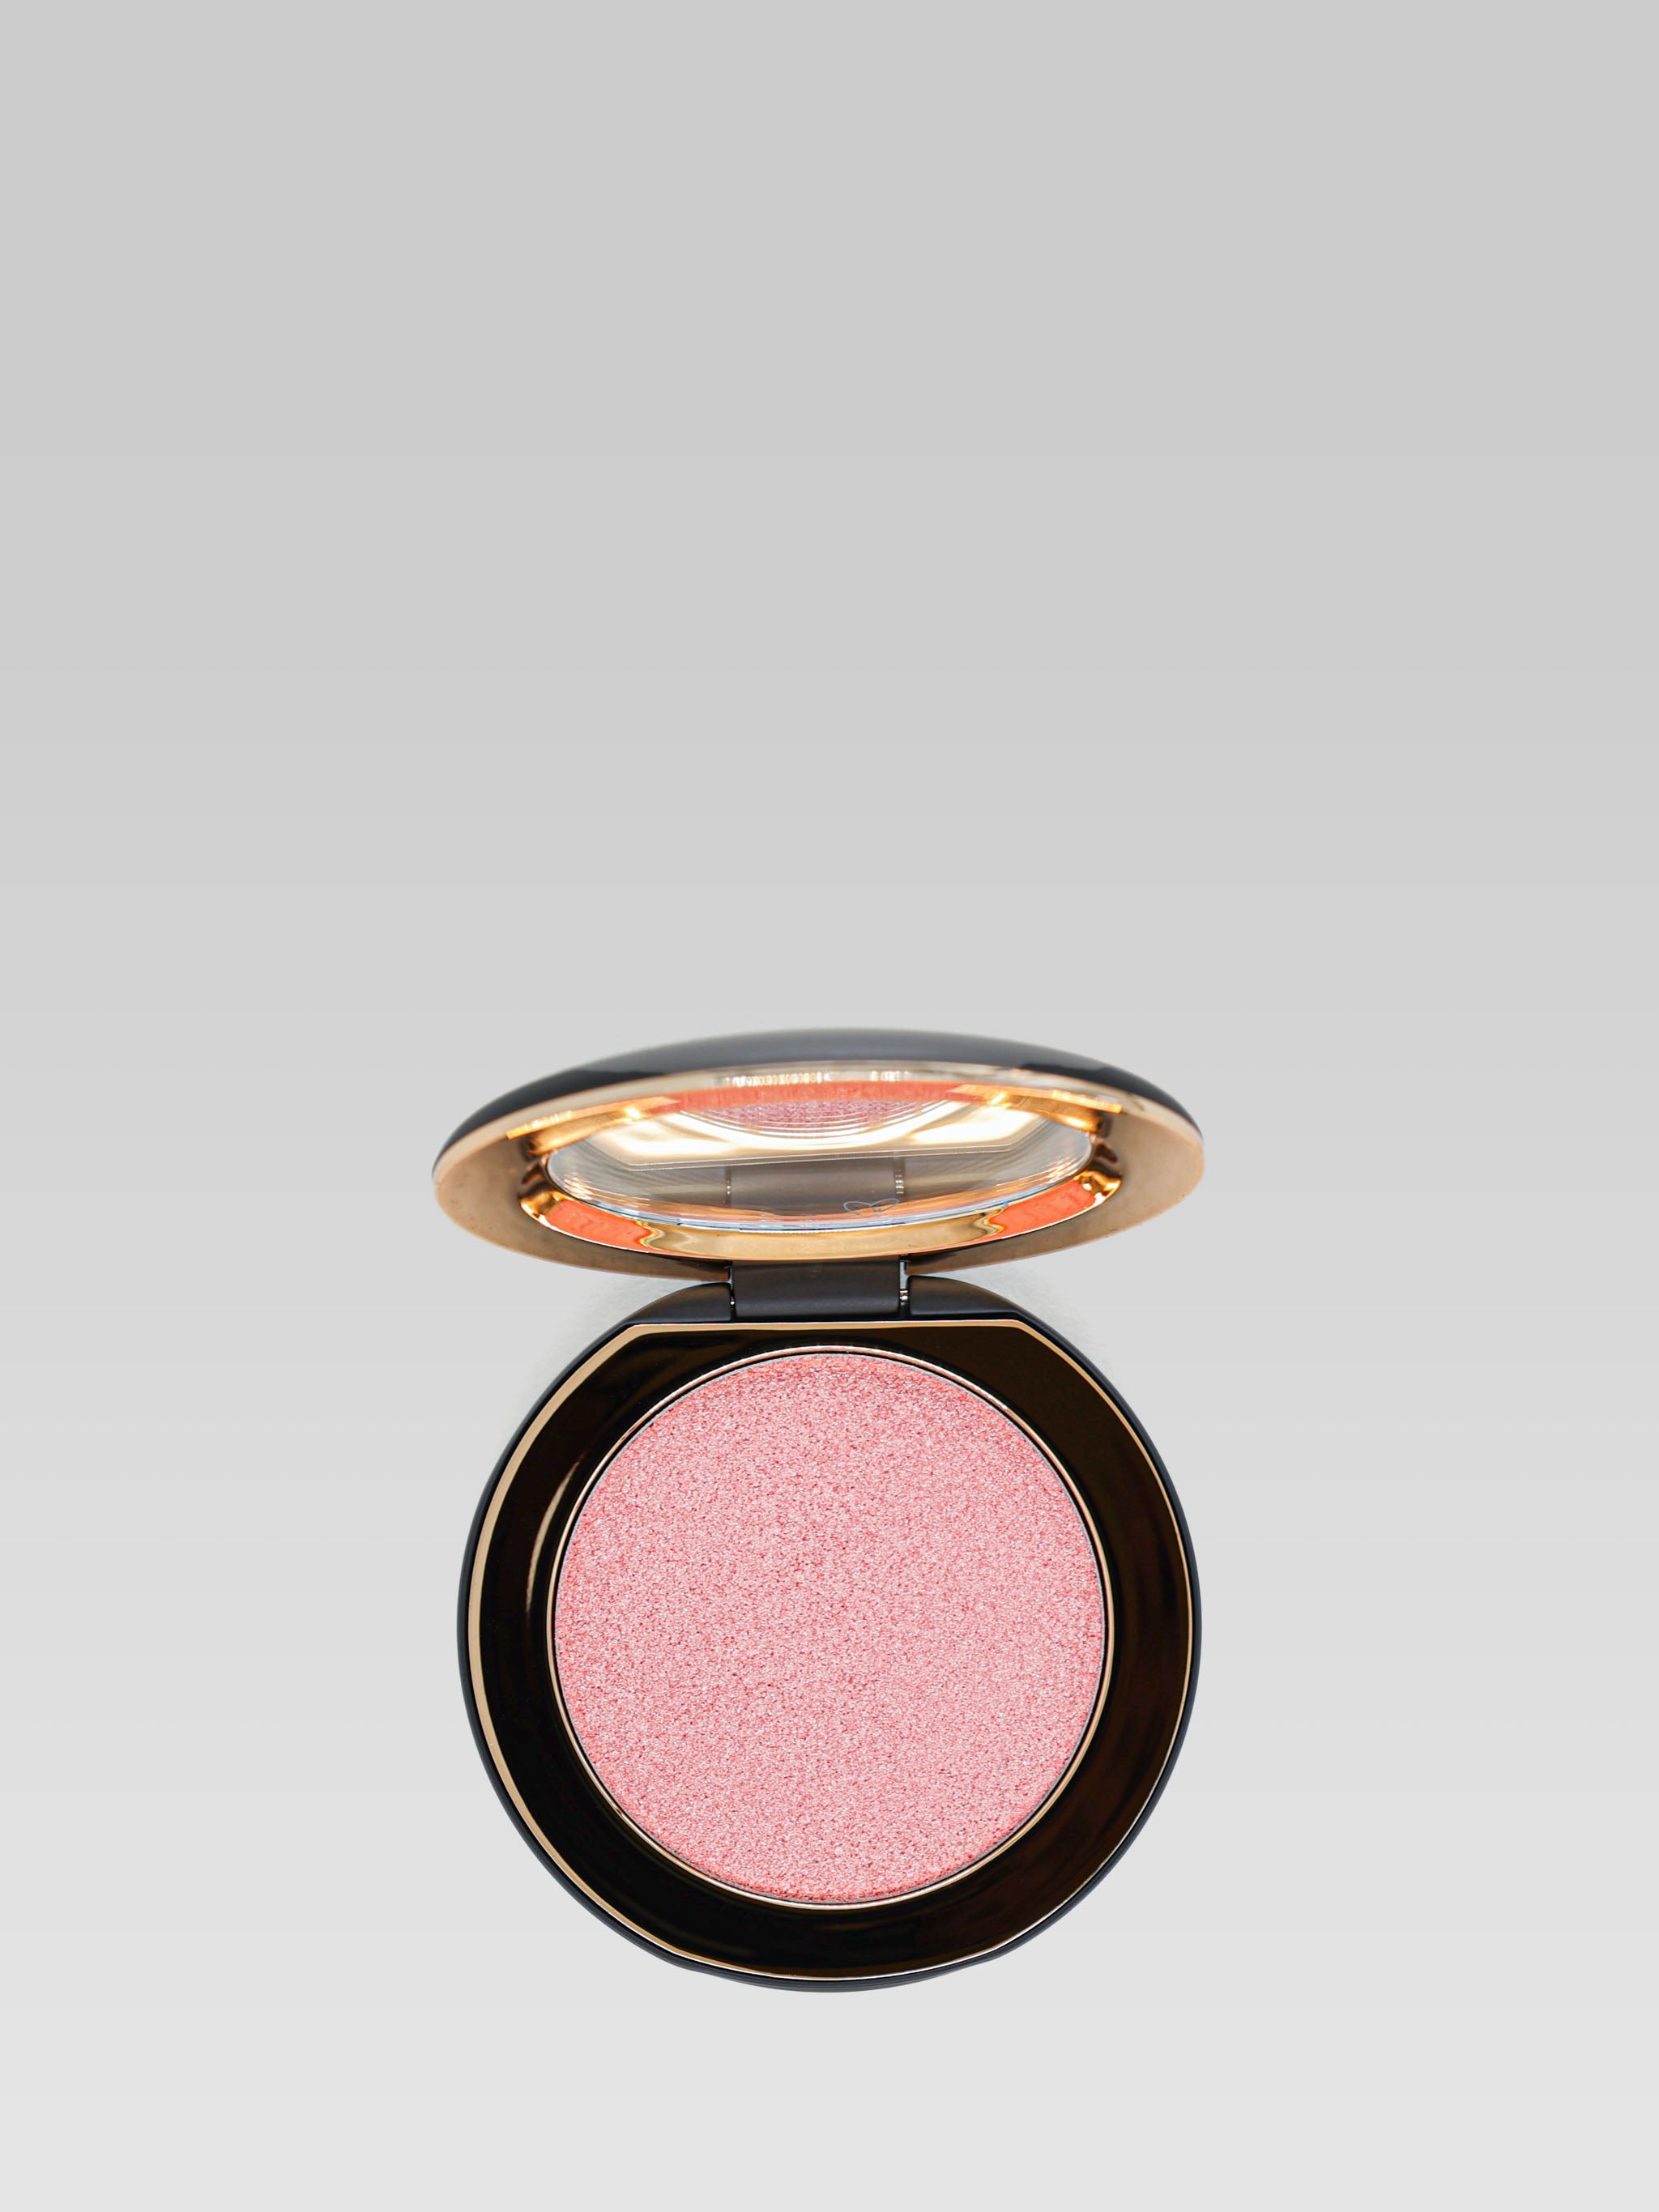 WESTMAN ATELIER Super Loaded Tinted Highlight in Peau de Rosé product shot